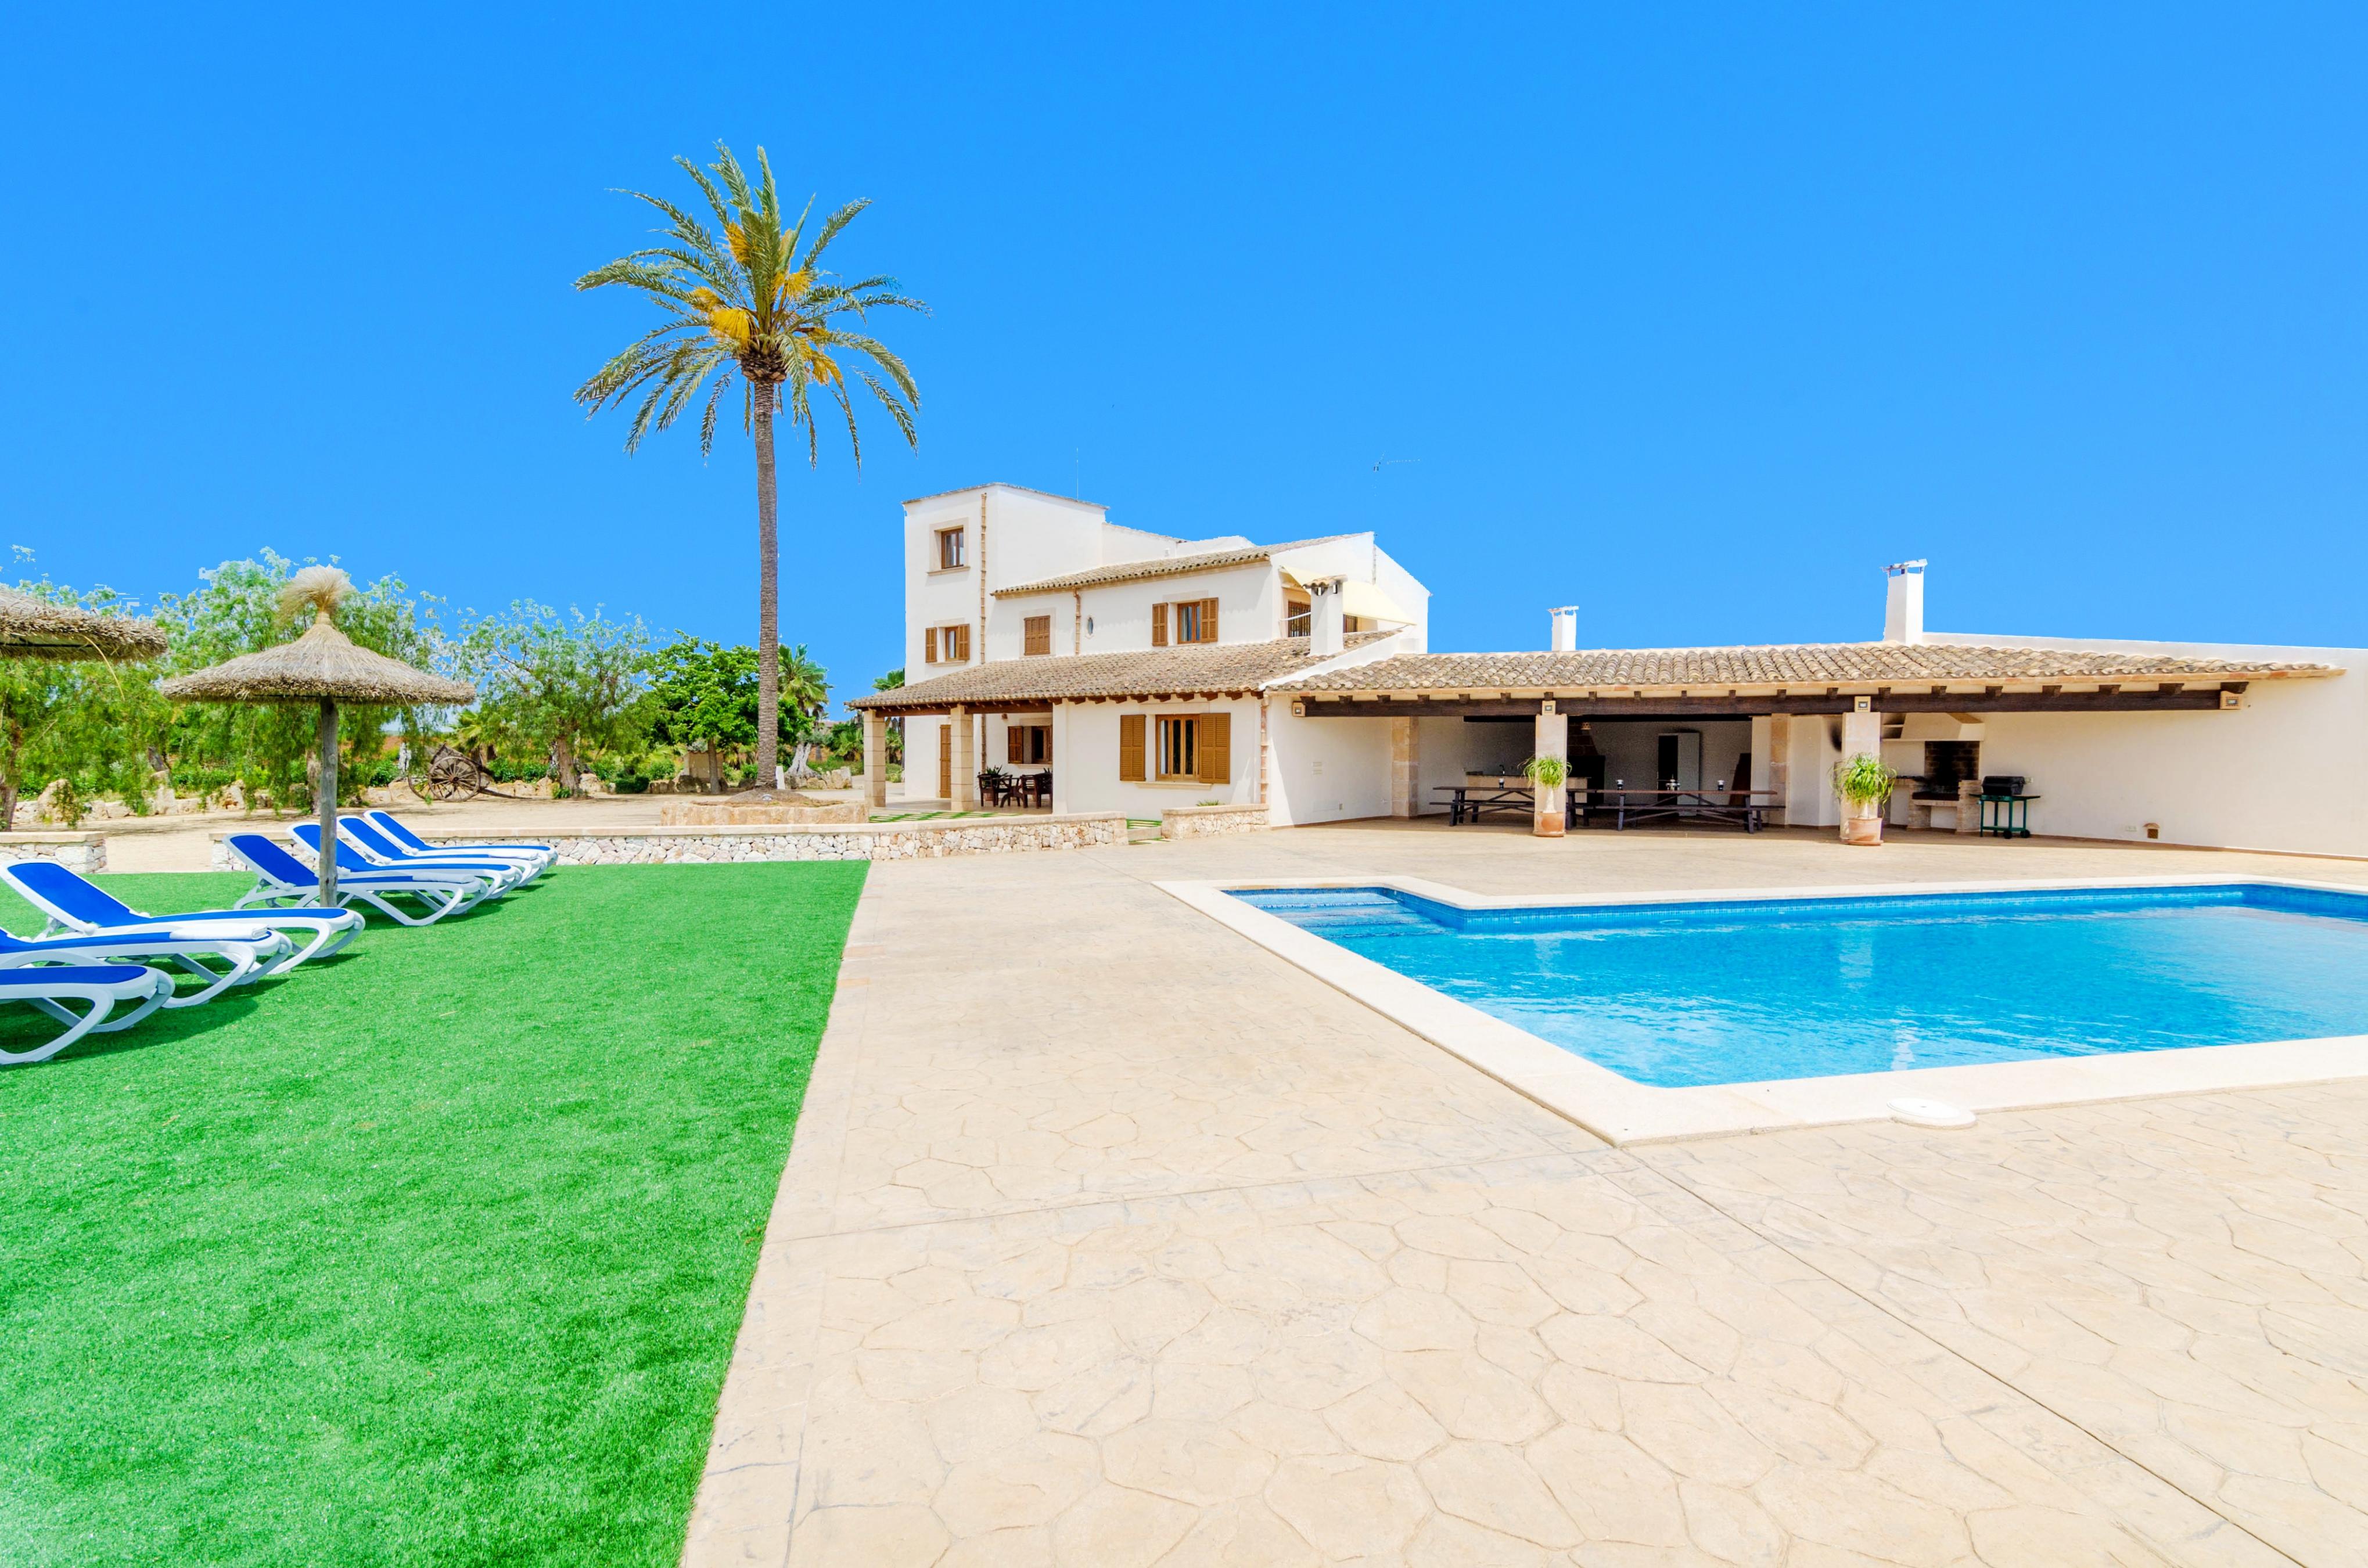 Property Image 2 - FINCA SANT BLAI NOU - Beautiful villa with private pool in a quiet area. Free WiFi